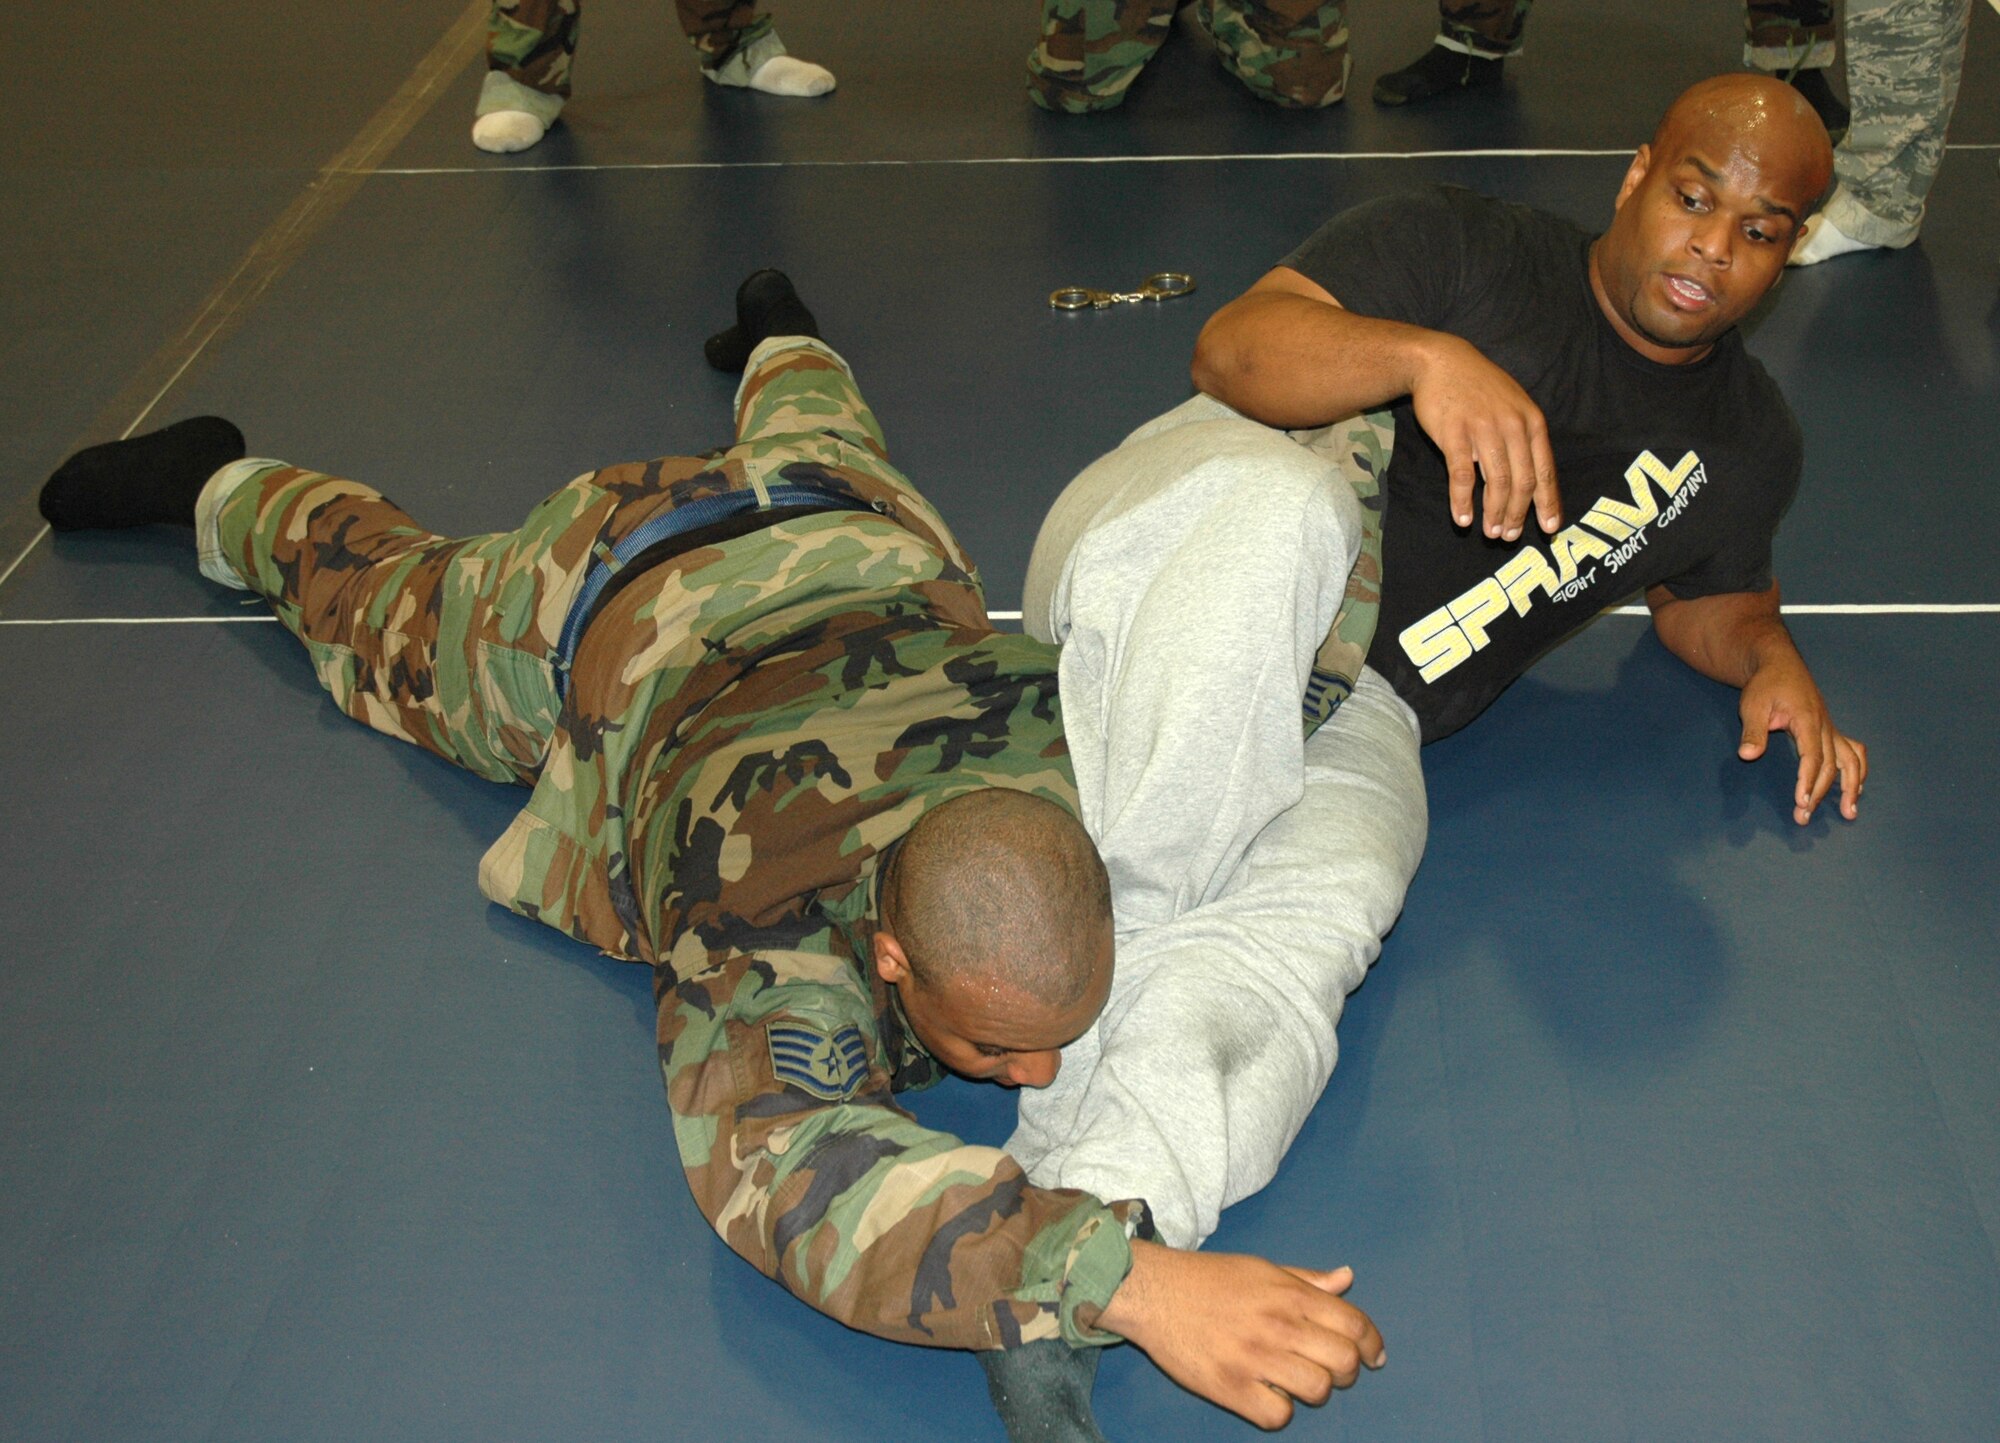 Carlos Cummings, martial arts instructor and owner of Cummings Combat Sambo, puts Staff Sgt. Deante Brooks, 325th Security Forces Squadron patrolman, into an arm hold during self-defense class Mr. Cummings taught to various patrolmen from the 325th SFS. As part of the changing mission of security forces, classes  like Mr. Cummings are becoming a more frequent part of security forces training.  (U.S. Air Force photo/Staff Sgt. Timothy R. Capling)